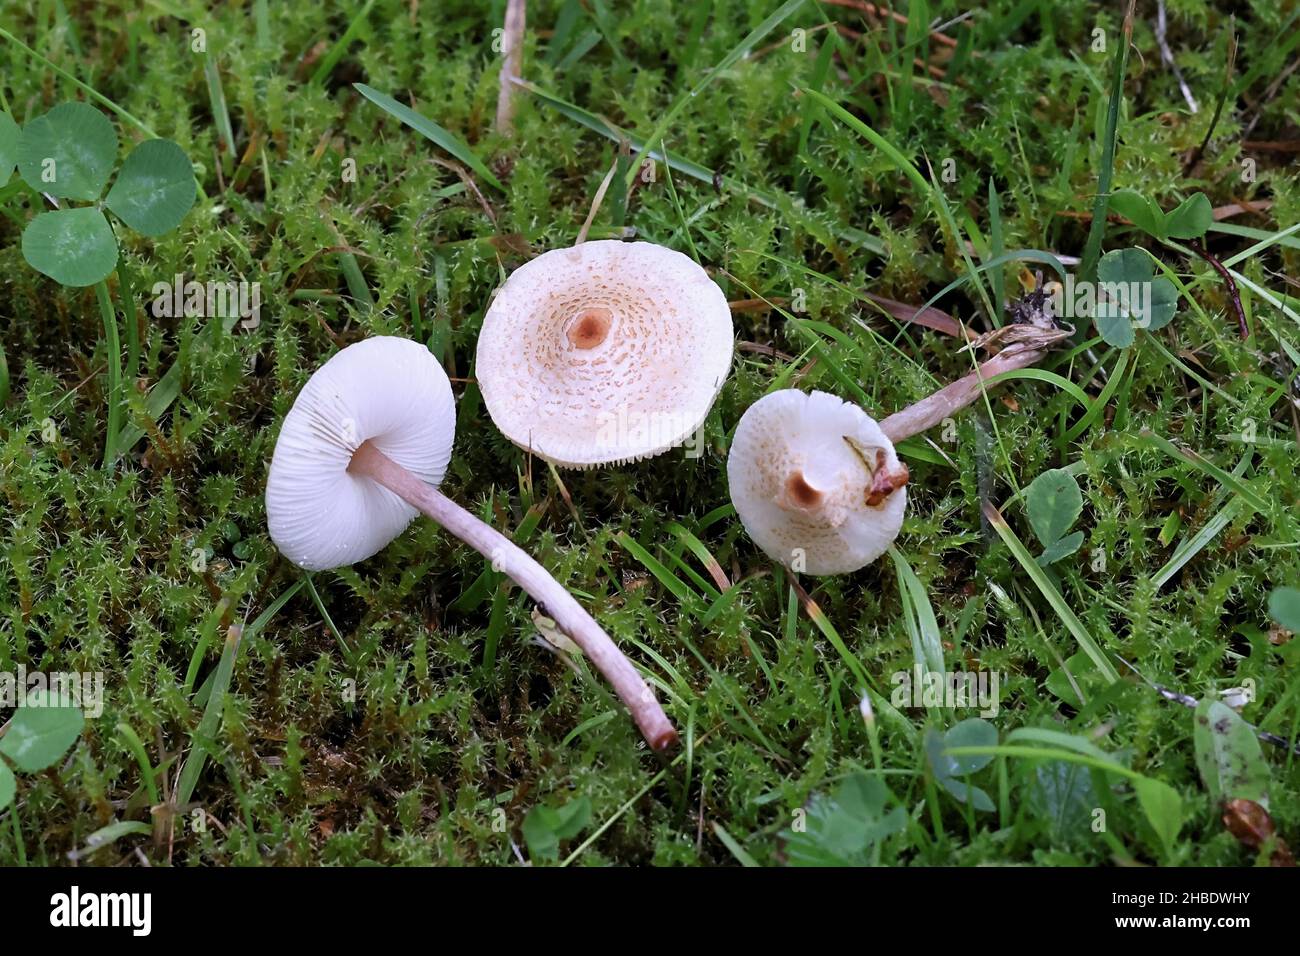 Lepiota cristata, commonly known as the stinking dapperling or the stinking parasol, wild mushroom from Finland Stock Photo